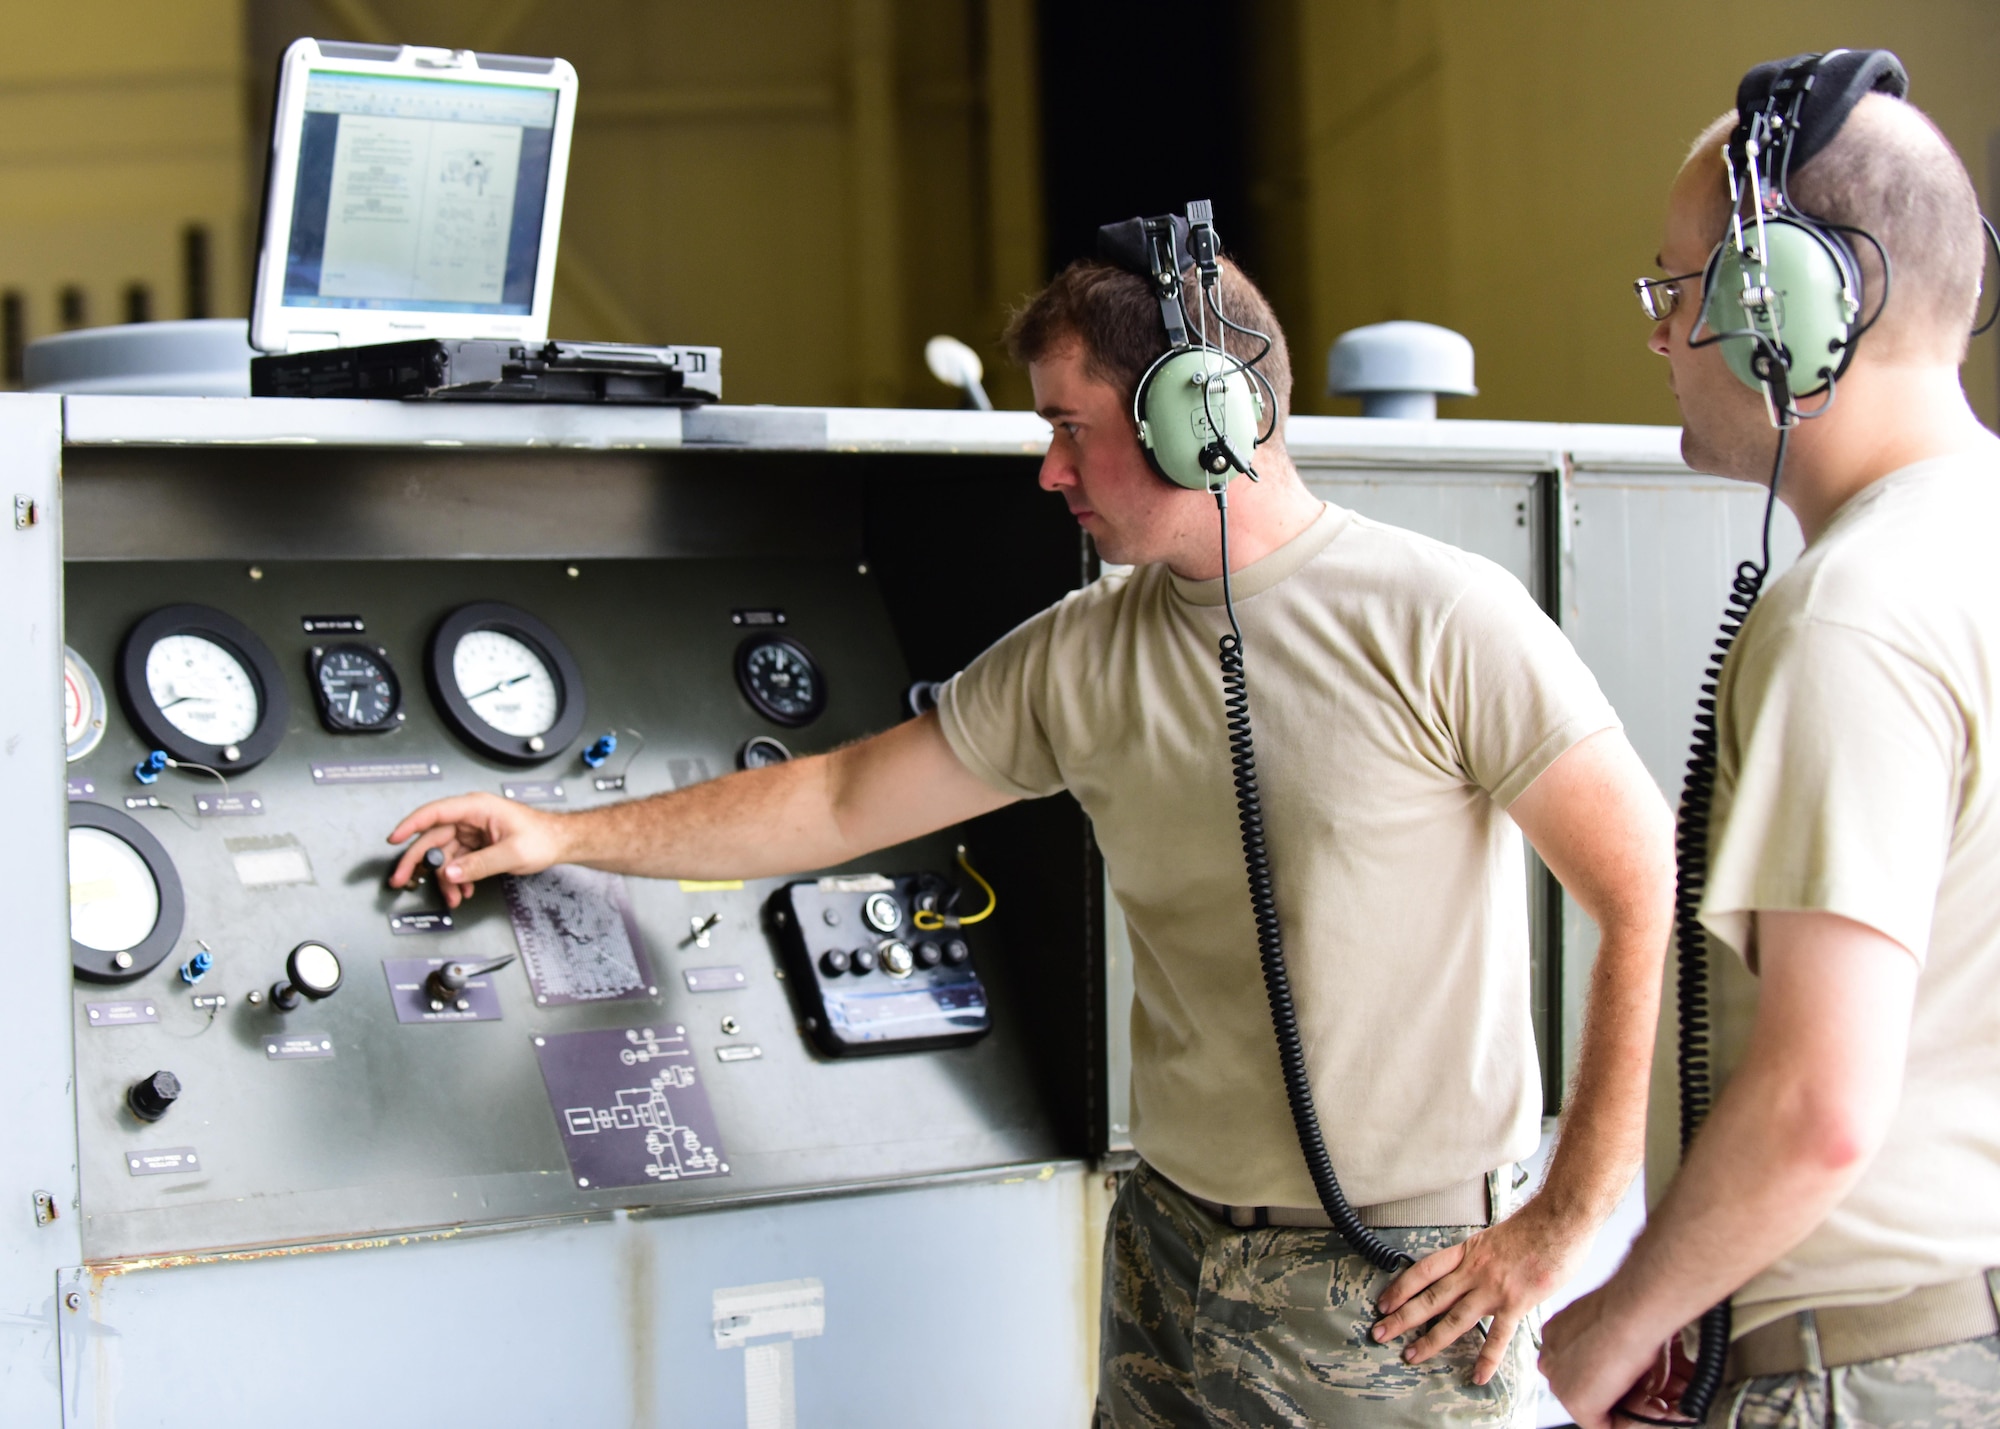 U.S. Air Force Tech. Sgt. Jeremy Garrow, left, an aircraft electrical and environmental system craftsman with the 509th Aircraft Maintenance Squadron (AMXS), and Staff Sgt. James Torrance, an aircraft electrical and environmental system craftsman with the 131st AMXS, monitor the cabin pressure during an annual test at Whiteman Air Force Base, Mo., July 27, 2017. These specialists are responsible for all the wiring and environmental control units on the aircraft.